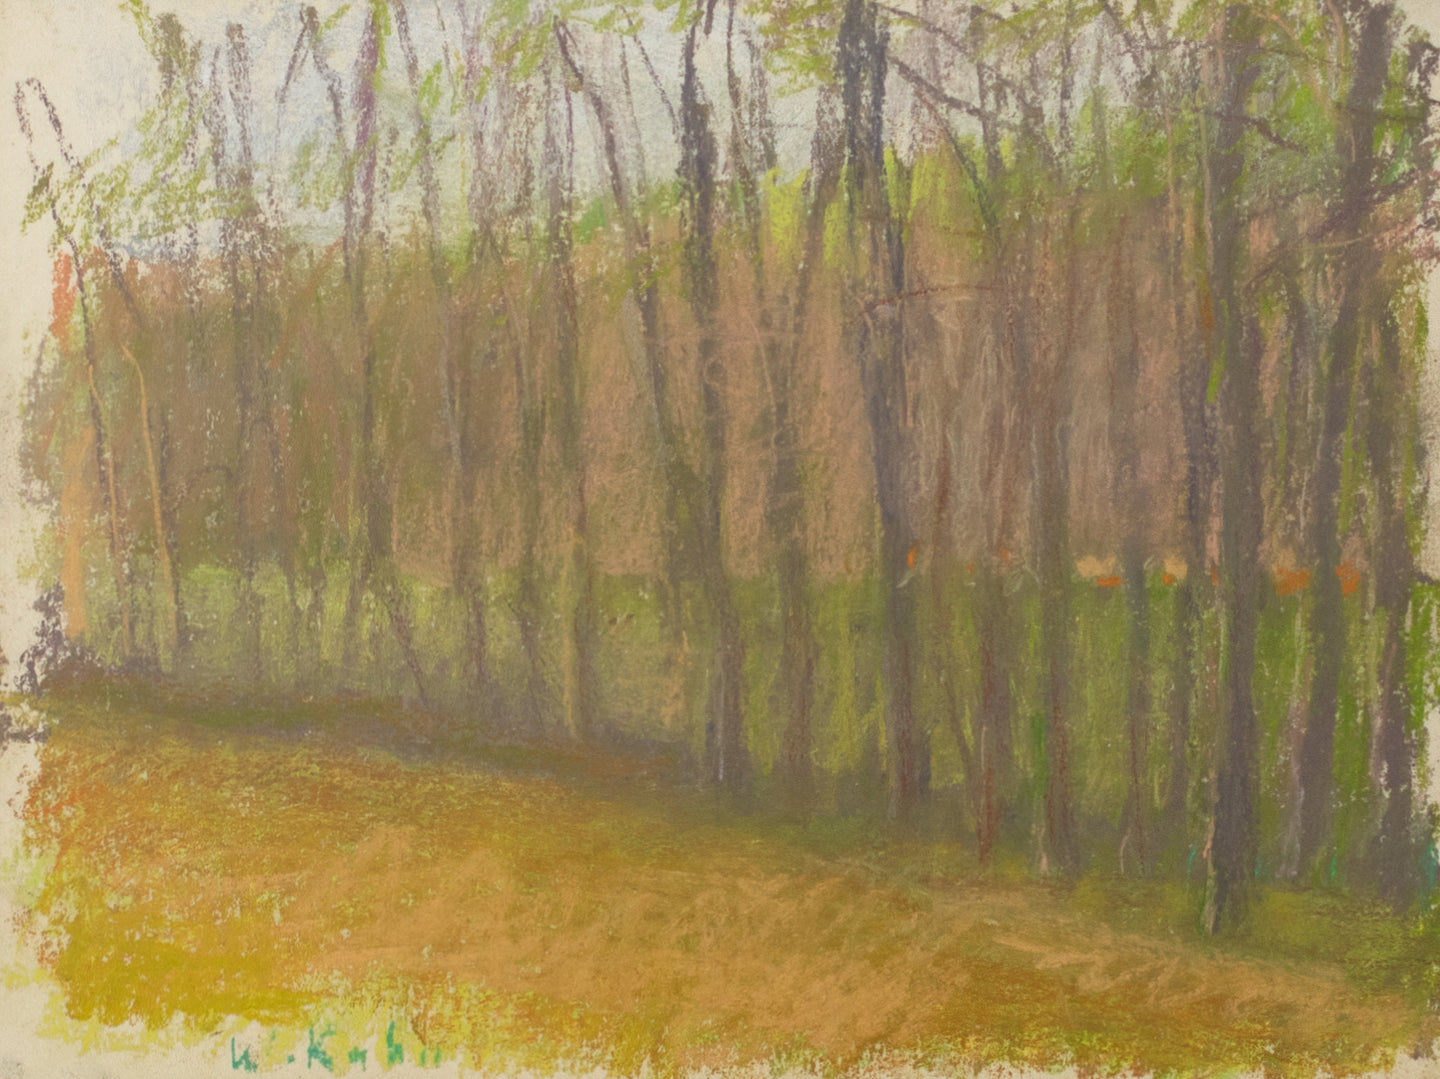 Wolf Kahn (1927-2020) Brake, 1989  Pastel on paper  9 x 12 inches Framed: 15 x 18.25 x 1 inches. This is a pastel of a treelike in greens, yellows and purple.Available at Manolis Projects Gallery